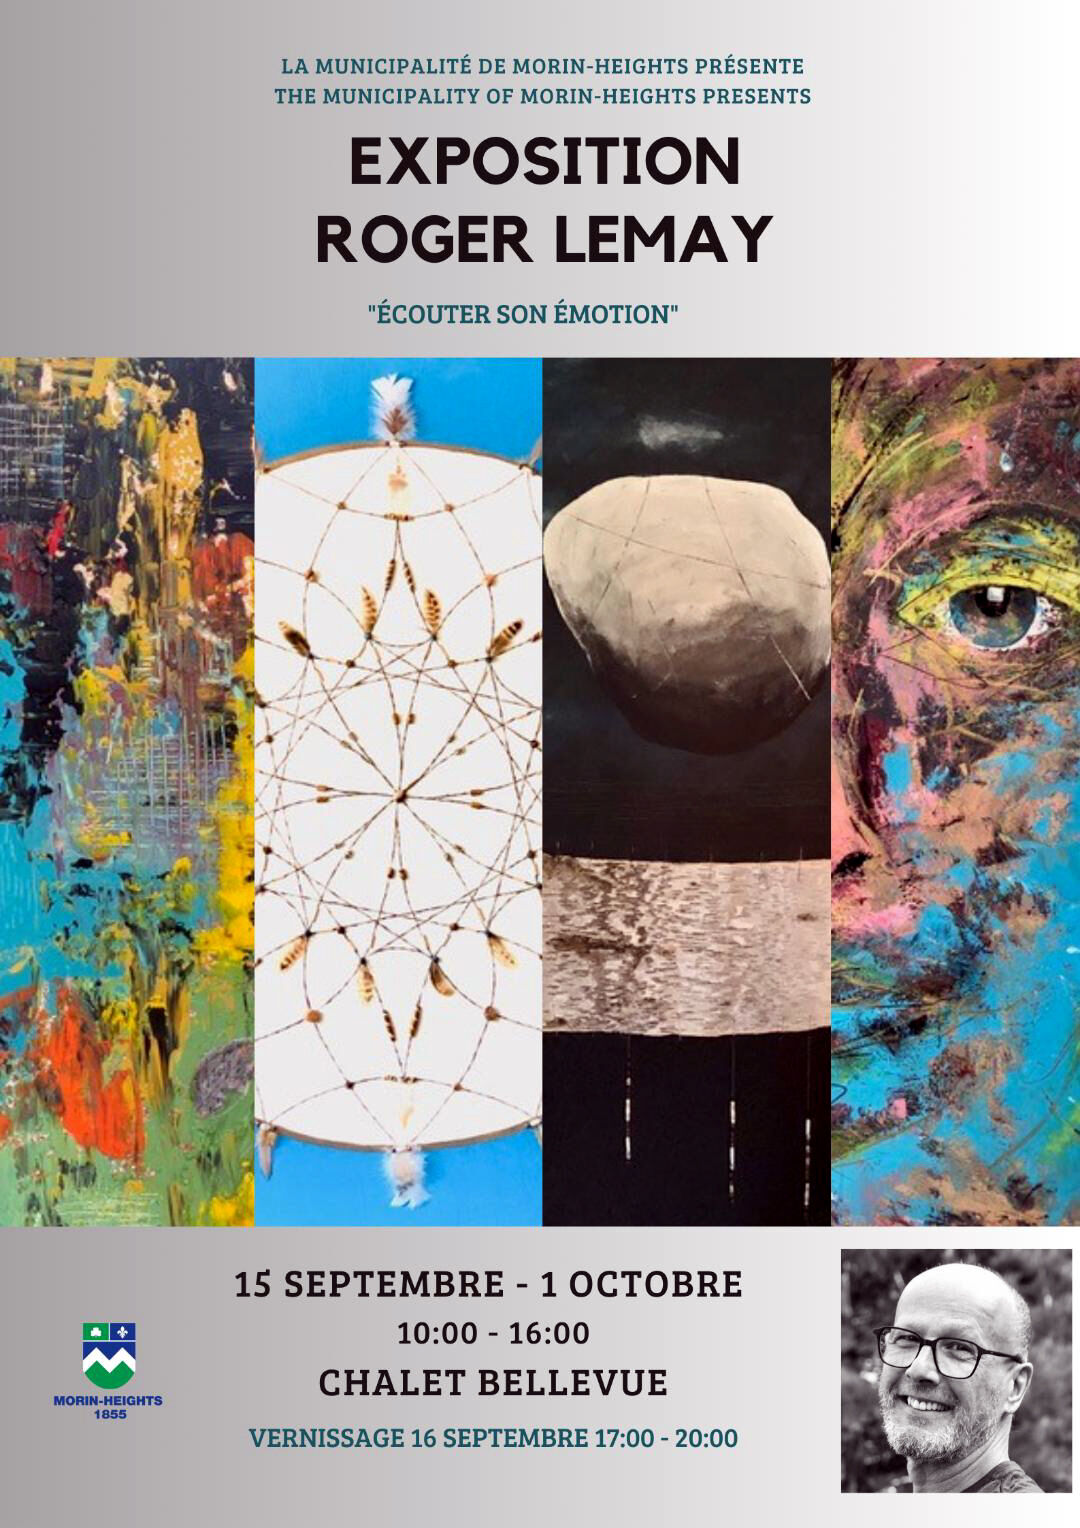 Roger Lemay